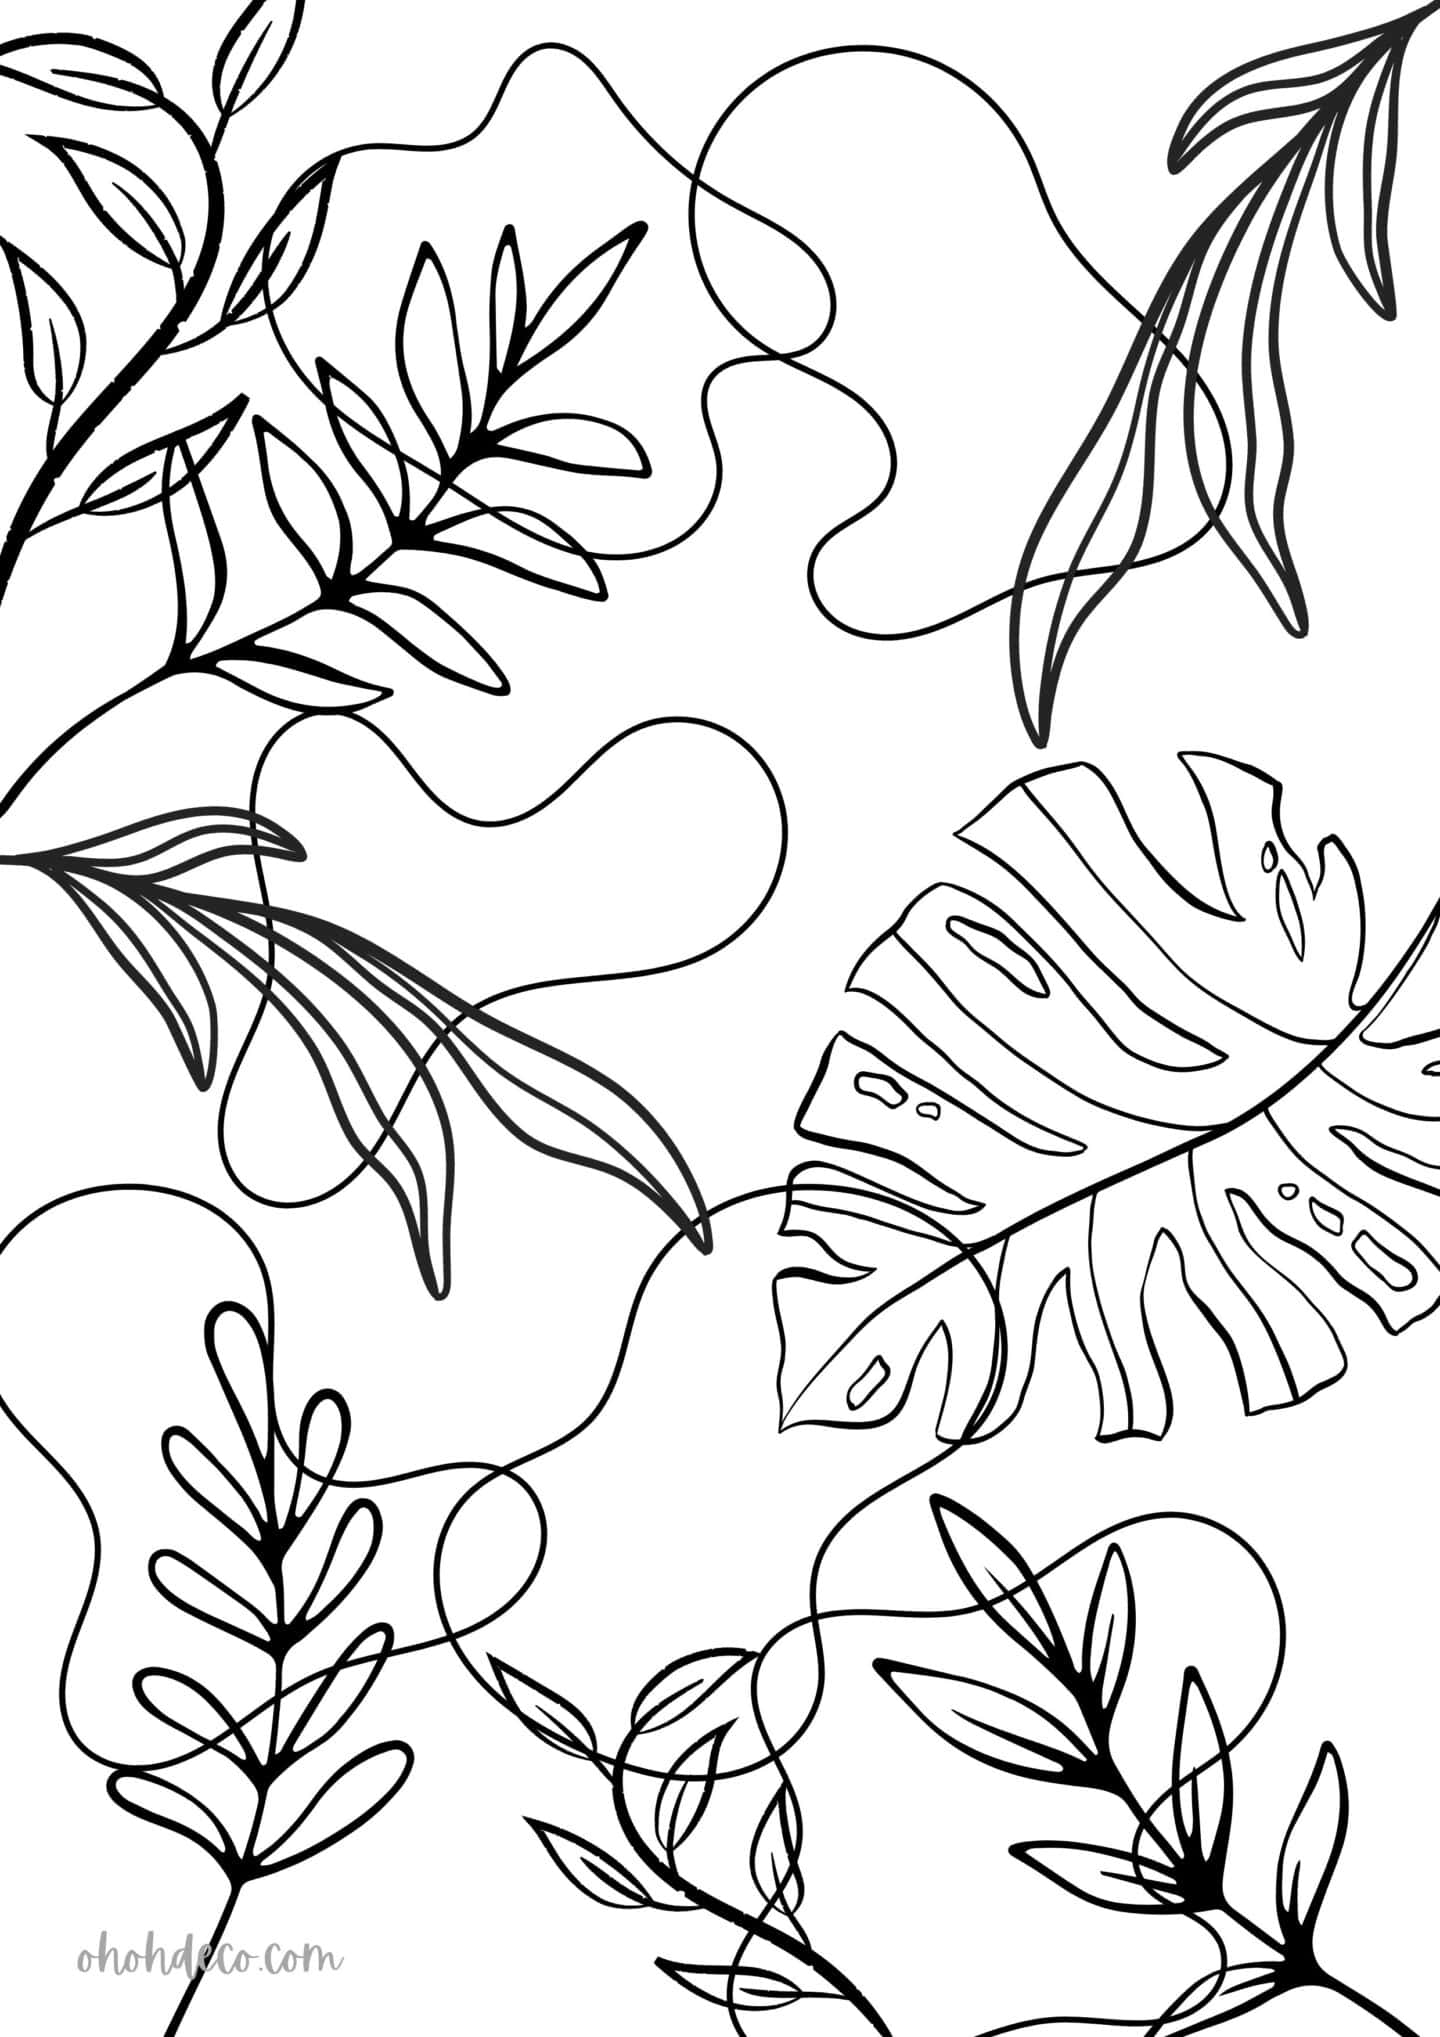 leaves coloring page